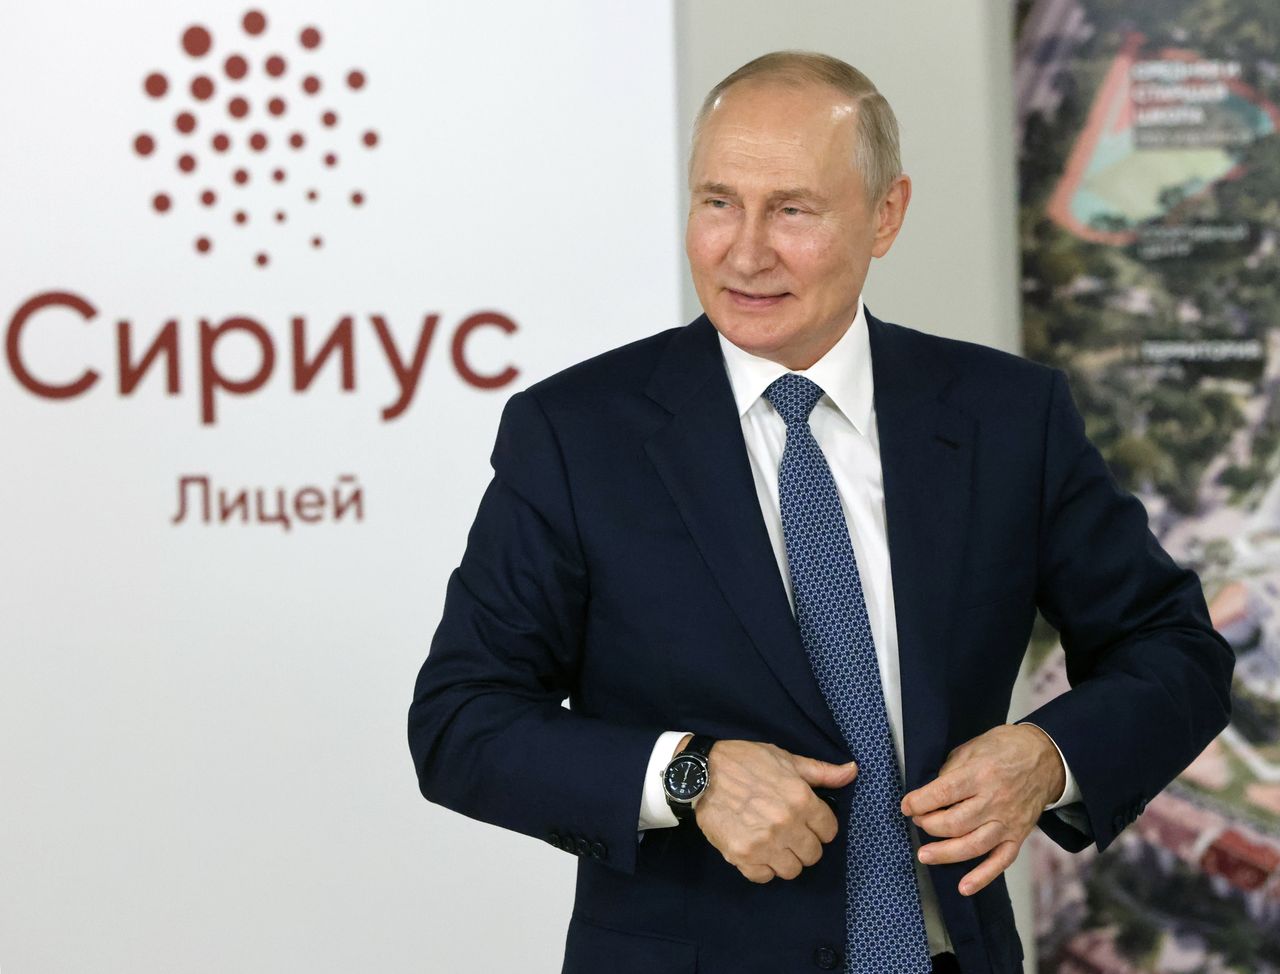 Vladimir Putin will be celebrating his birthday. However, it is not known which one (Photo by Contributor/Getty Images)